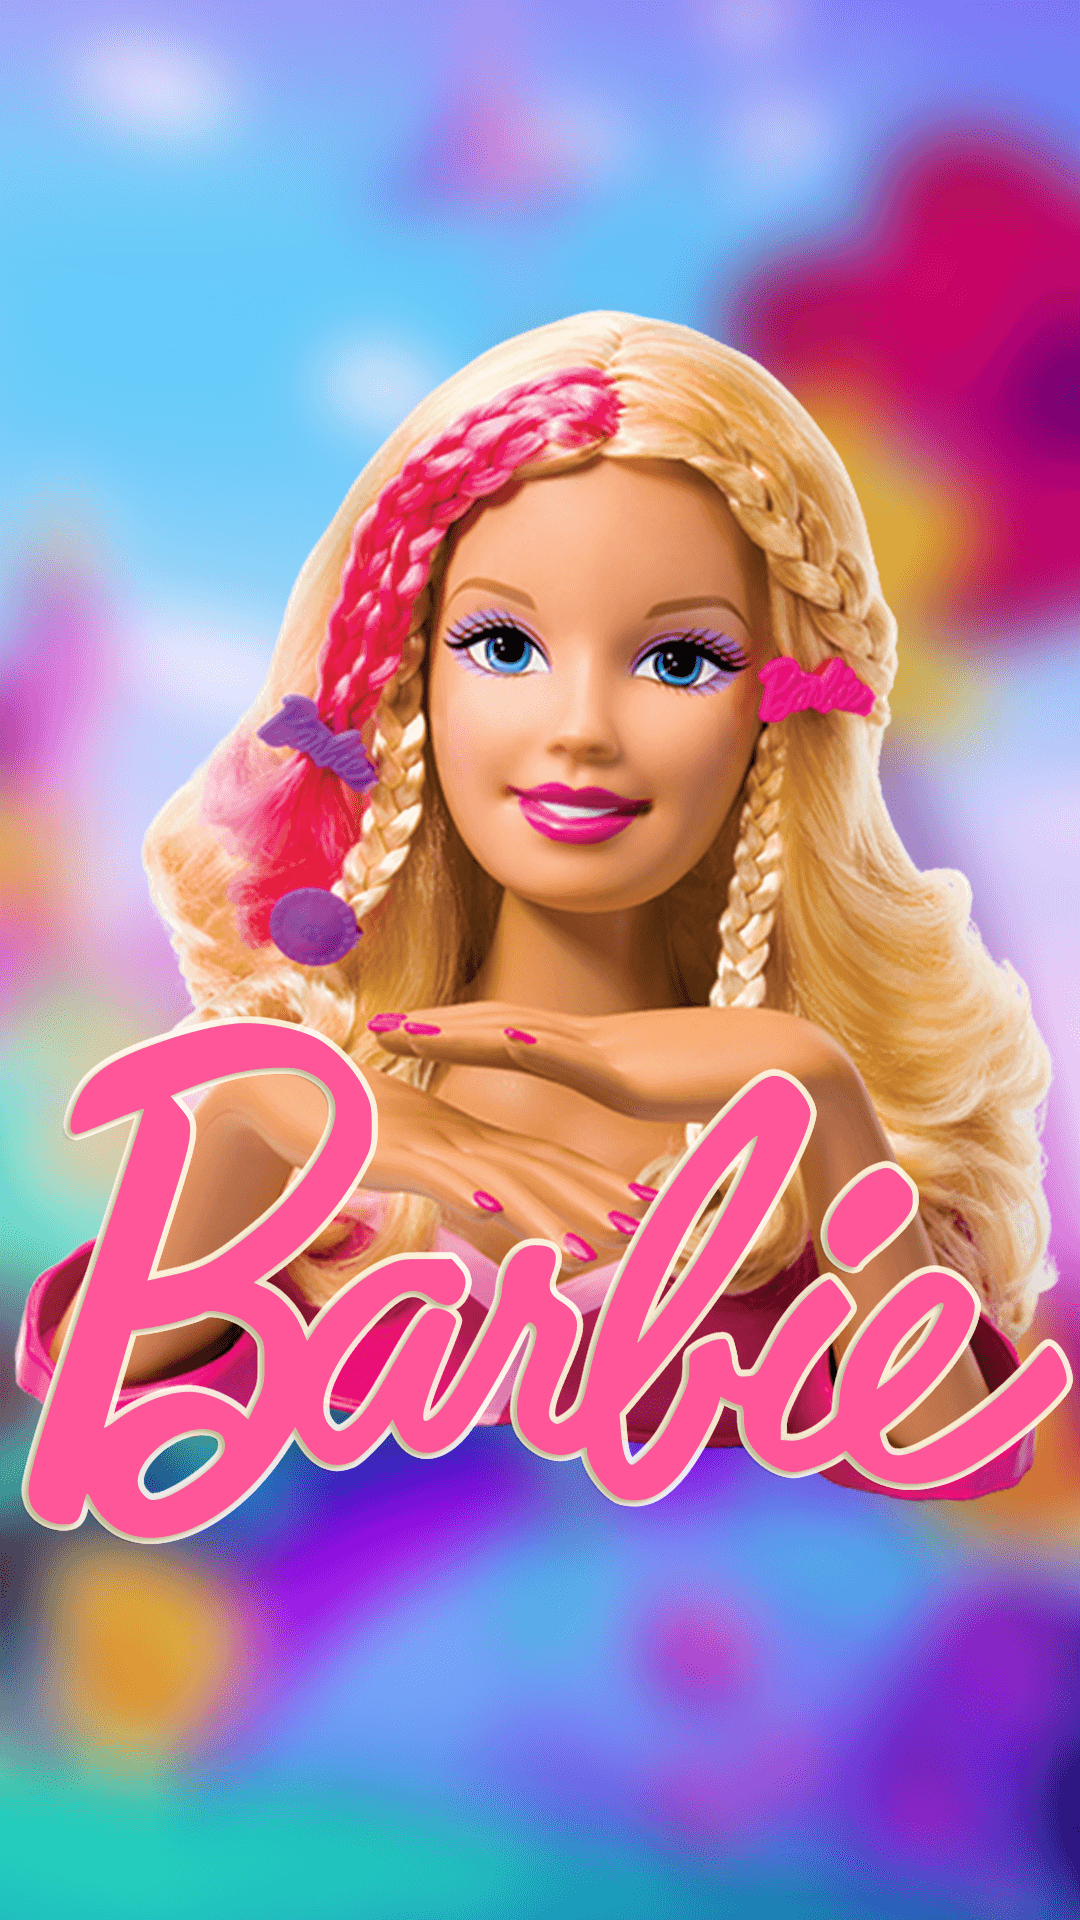 Barbie Wallpapers For Android - Wallpaper Cave